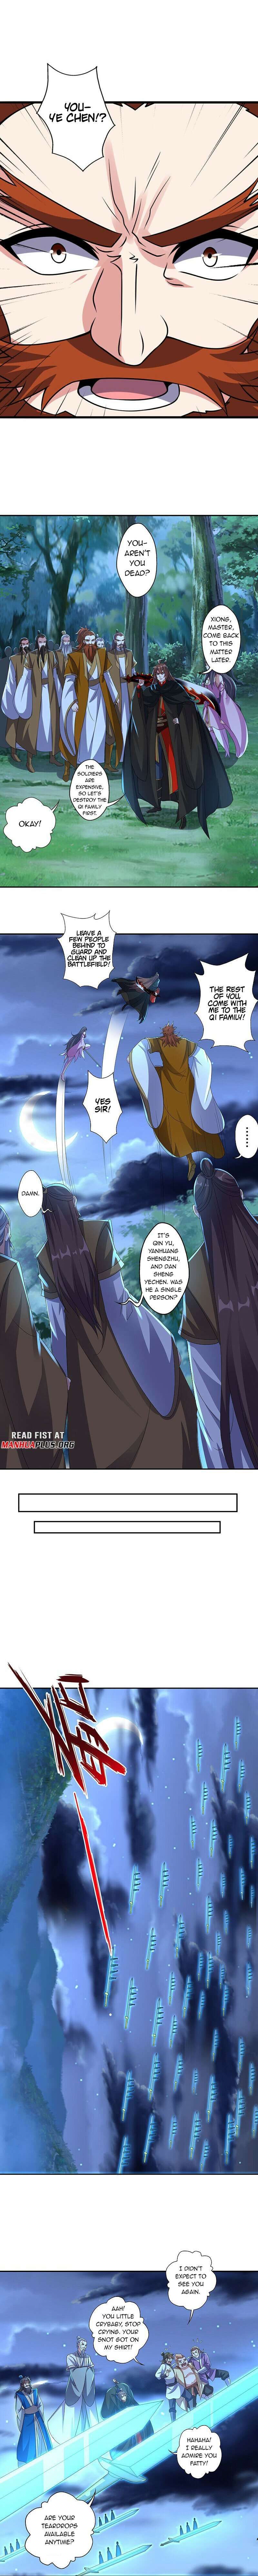 Banished Disciple's Counterattack Chapter 425 page 8